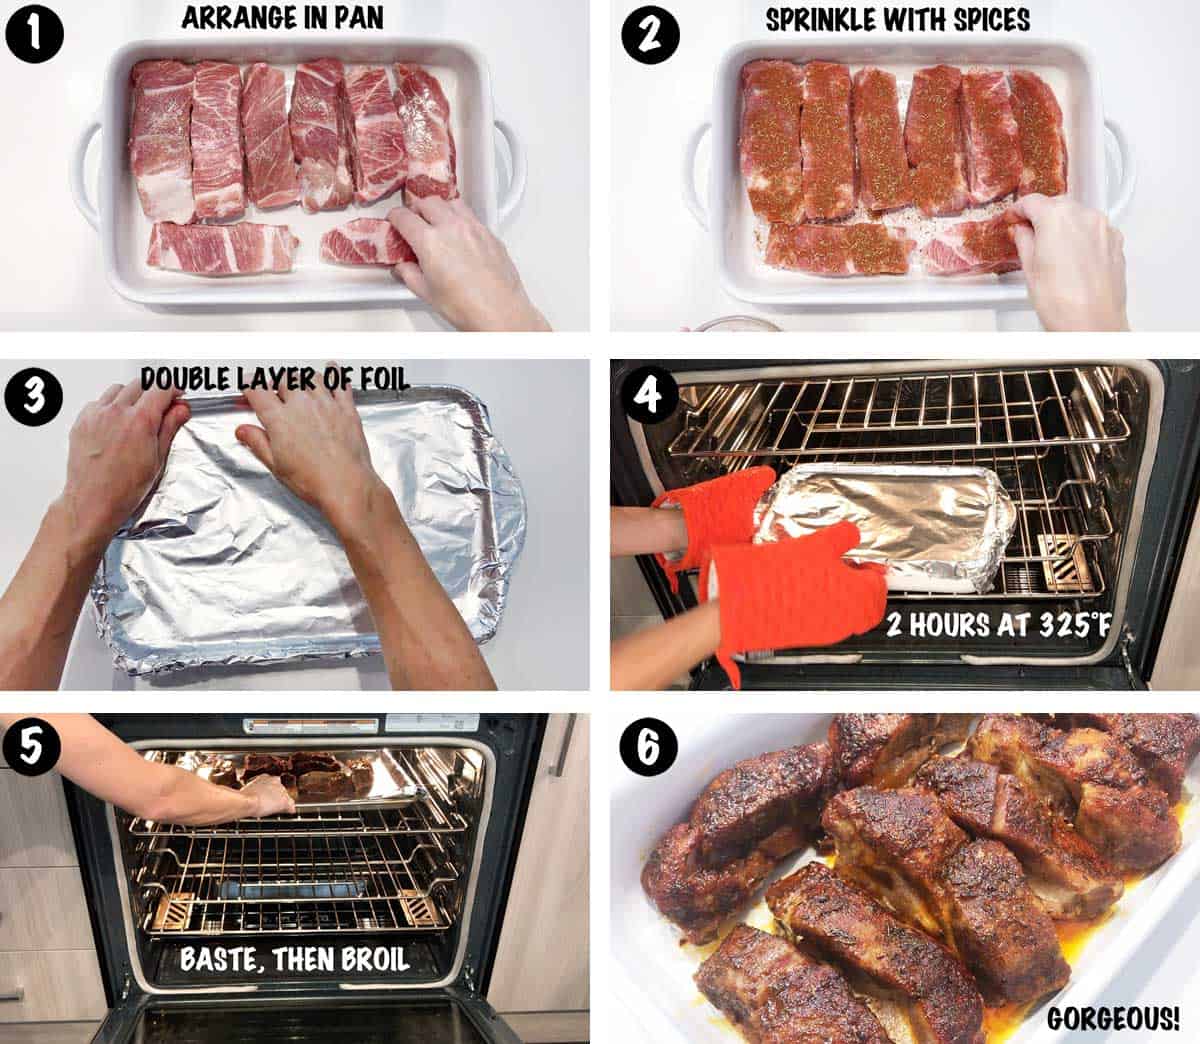 A six-photo collage showing the steps for cooking country-style pork ribs. 